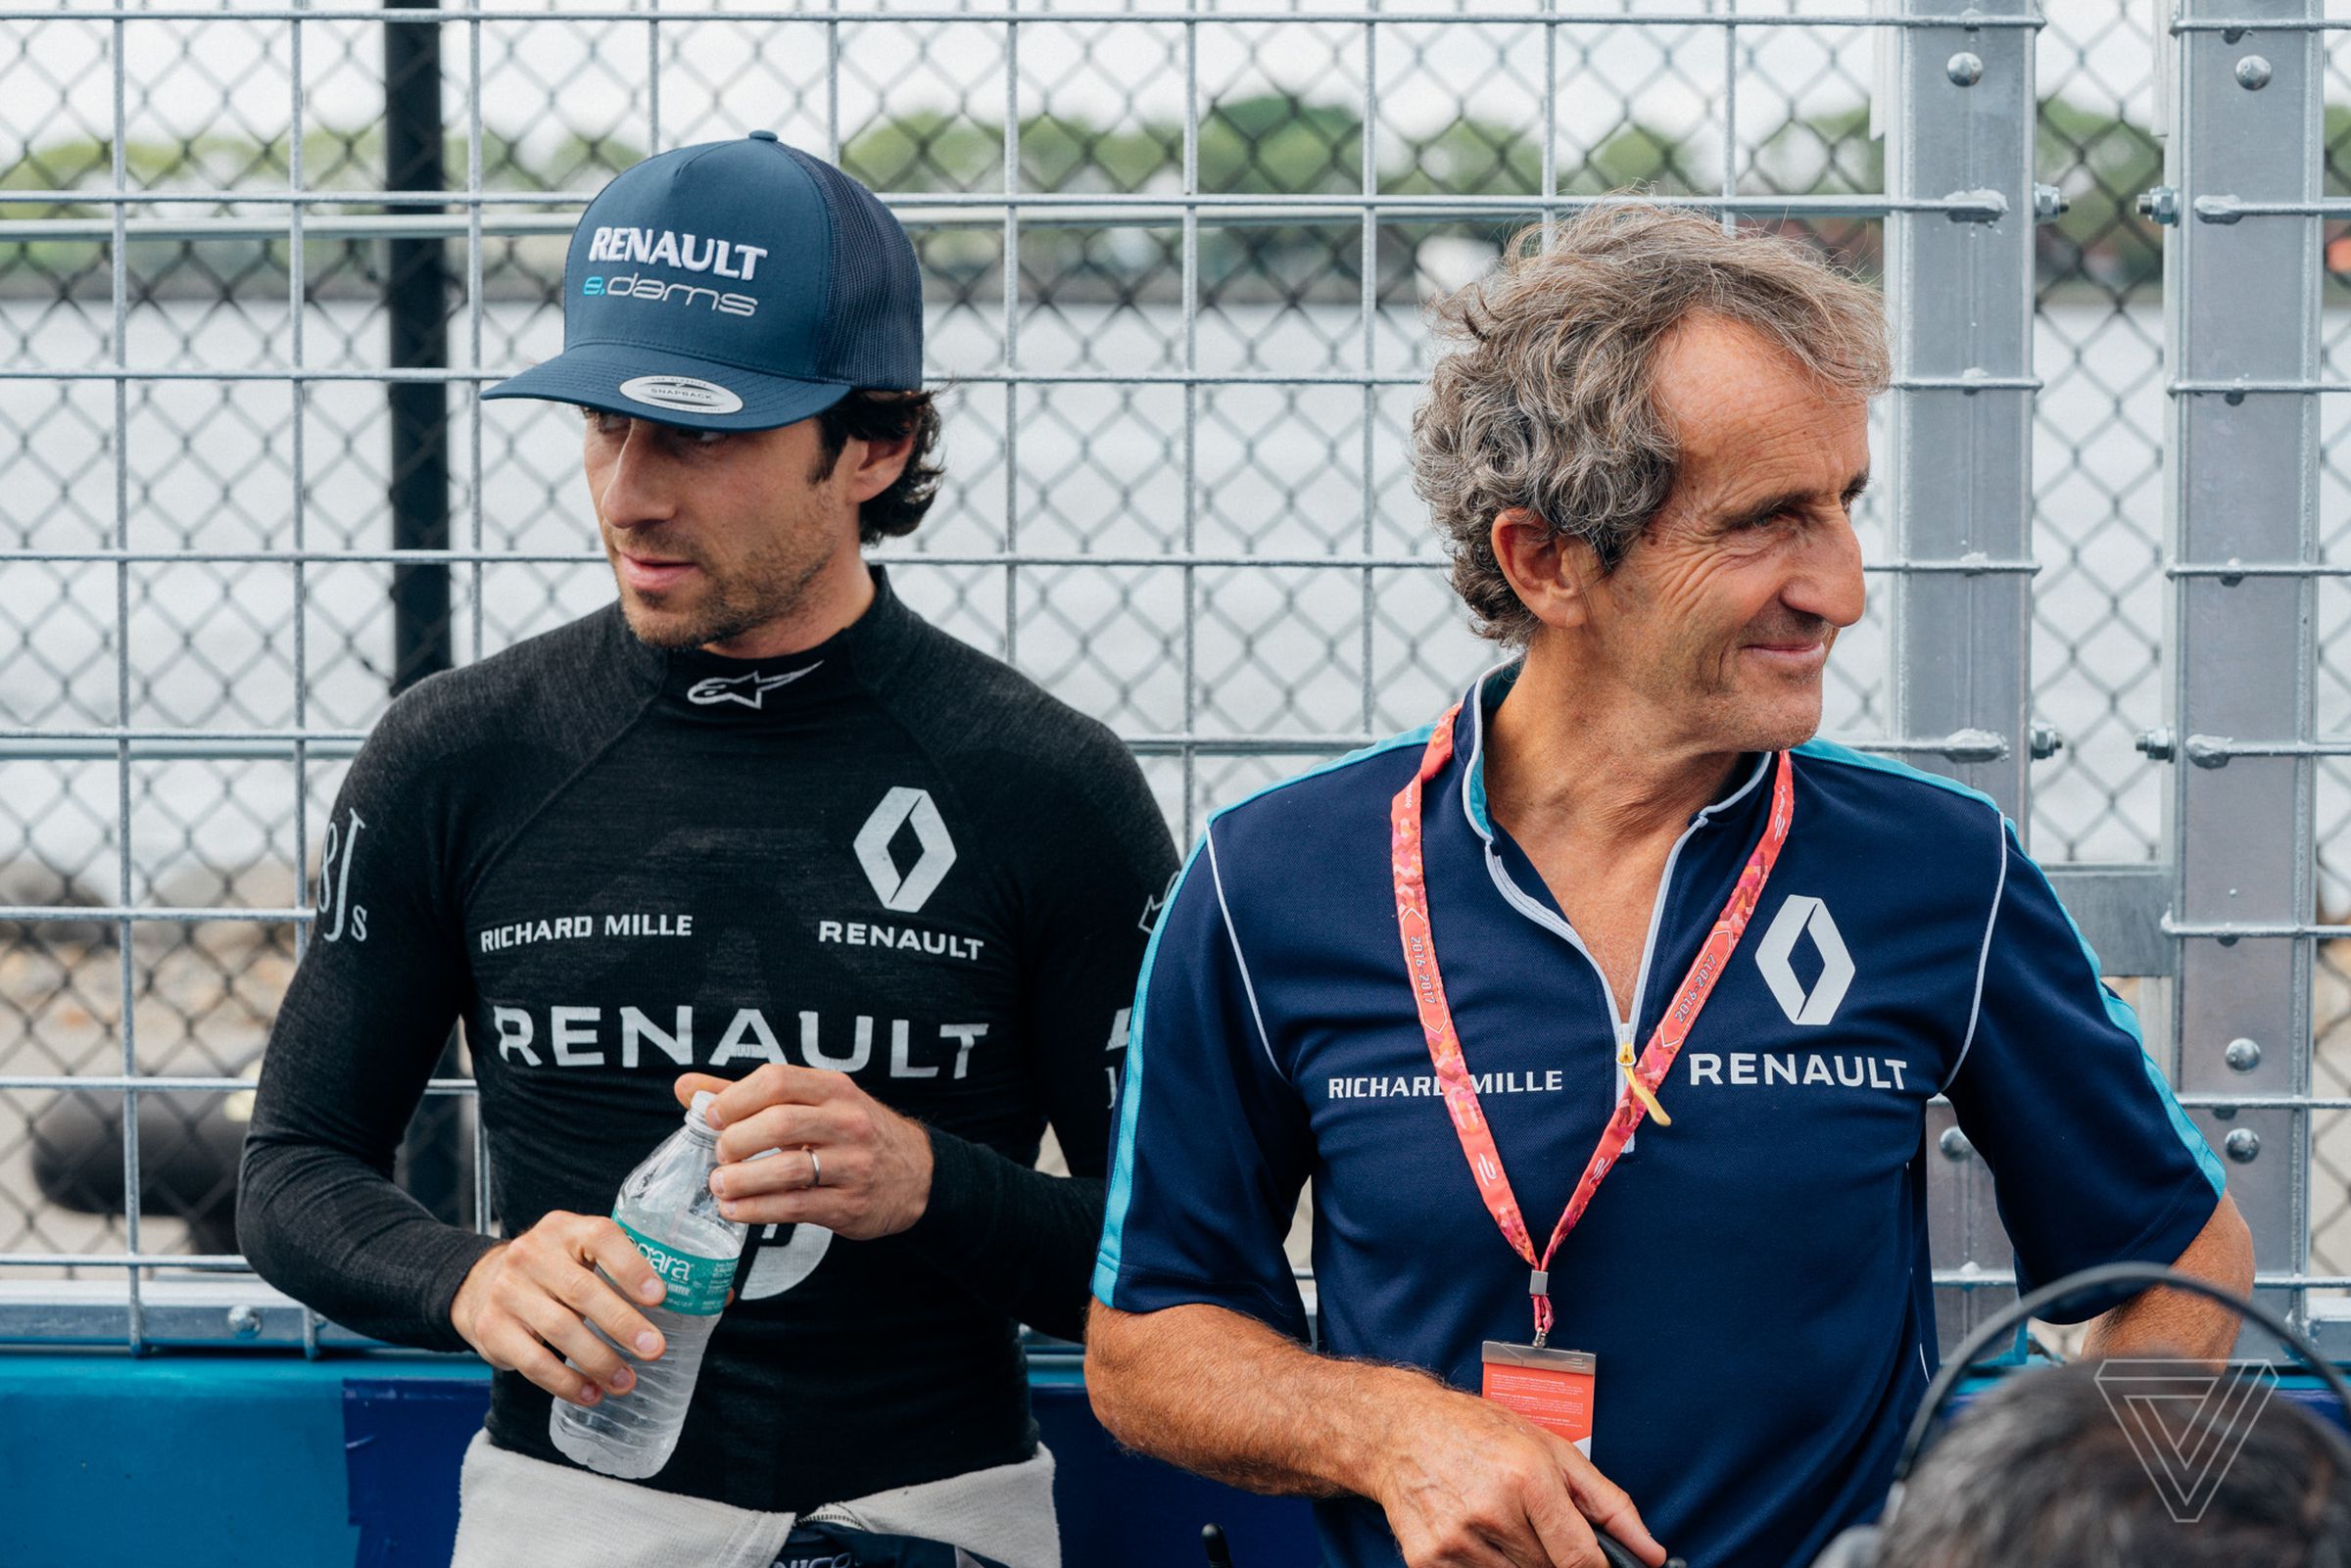 Renault driver Nico Prost stands next to his father, Alain, a four-time F1 champion. Nico Prost had extra pressure on his shoulders in NYC, because his teammate, Sebastien Buemi, was absent.